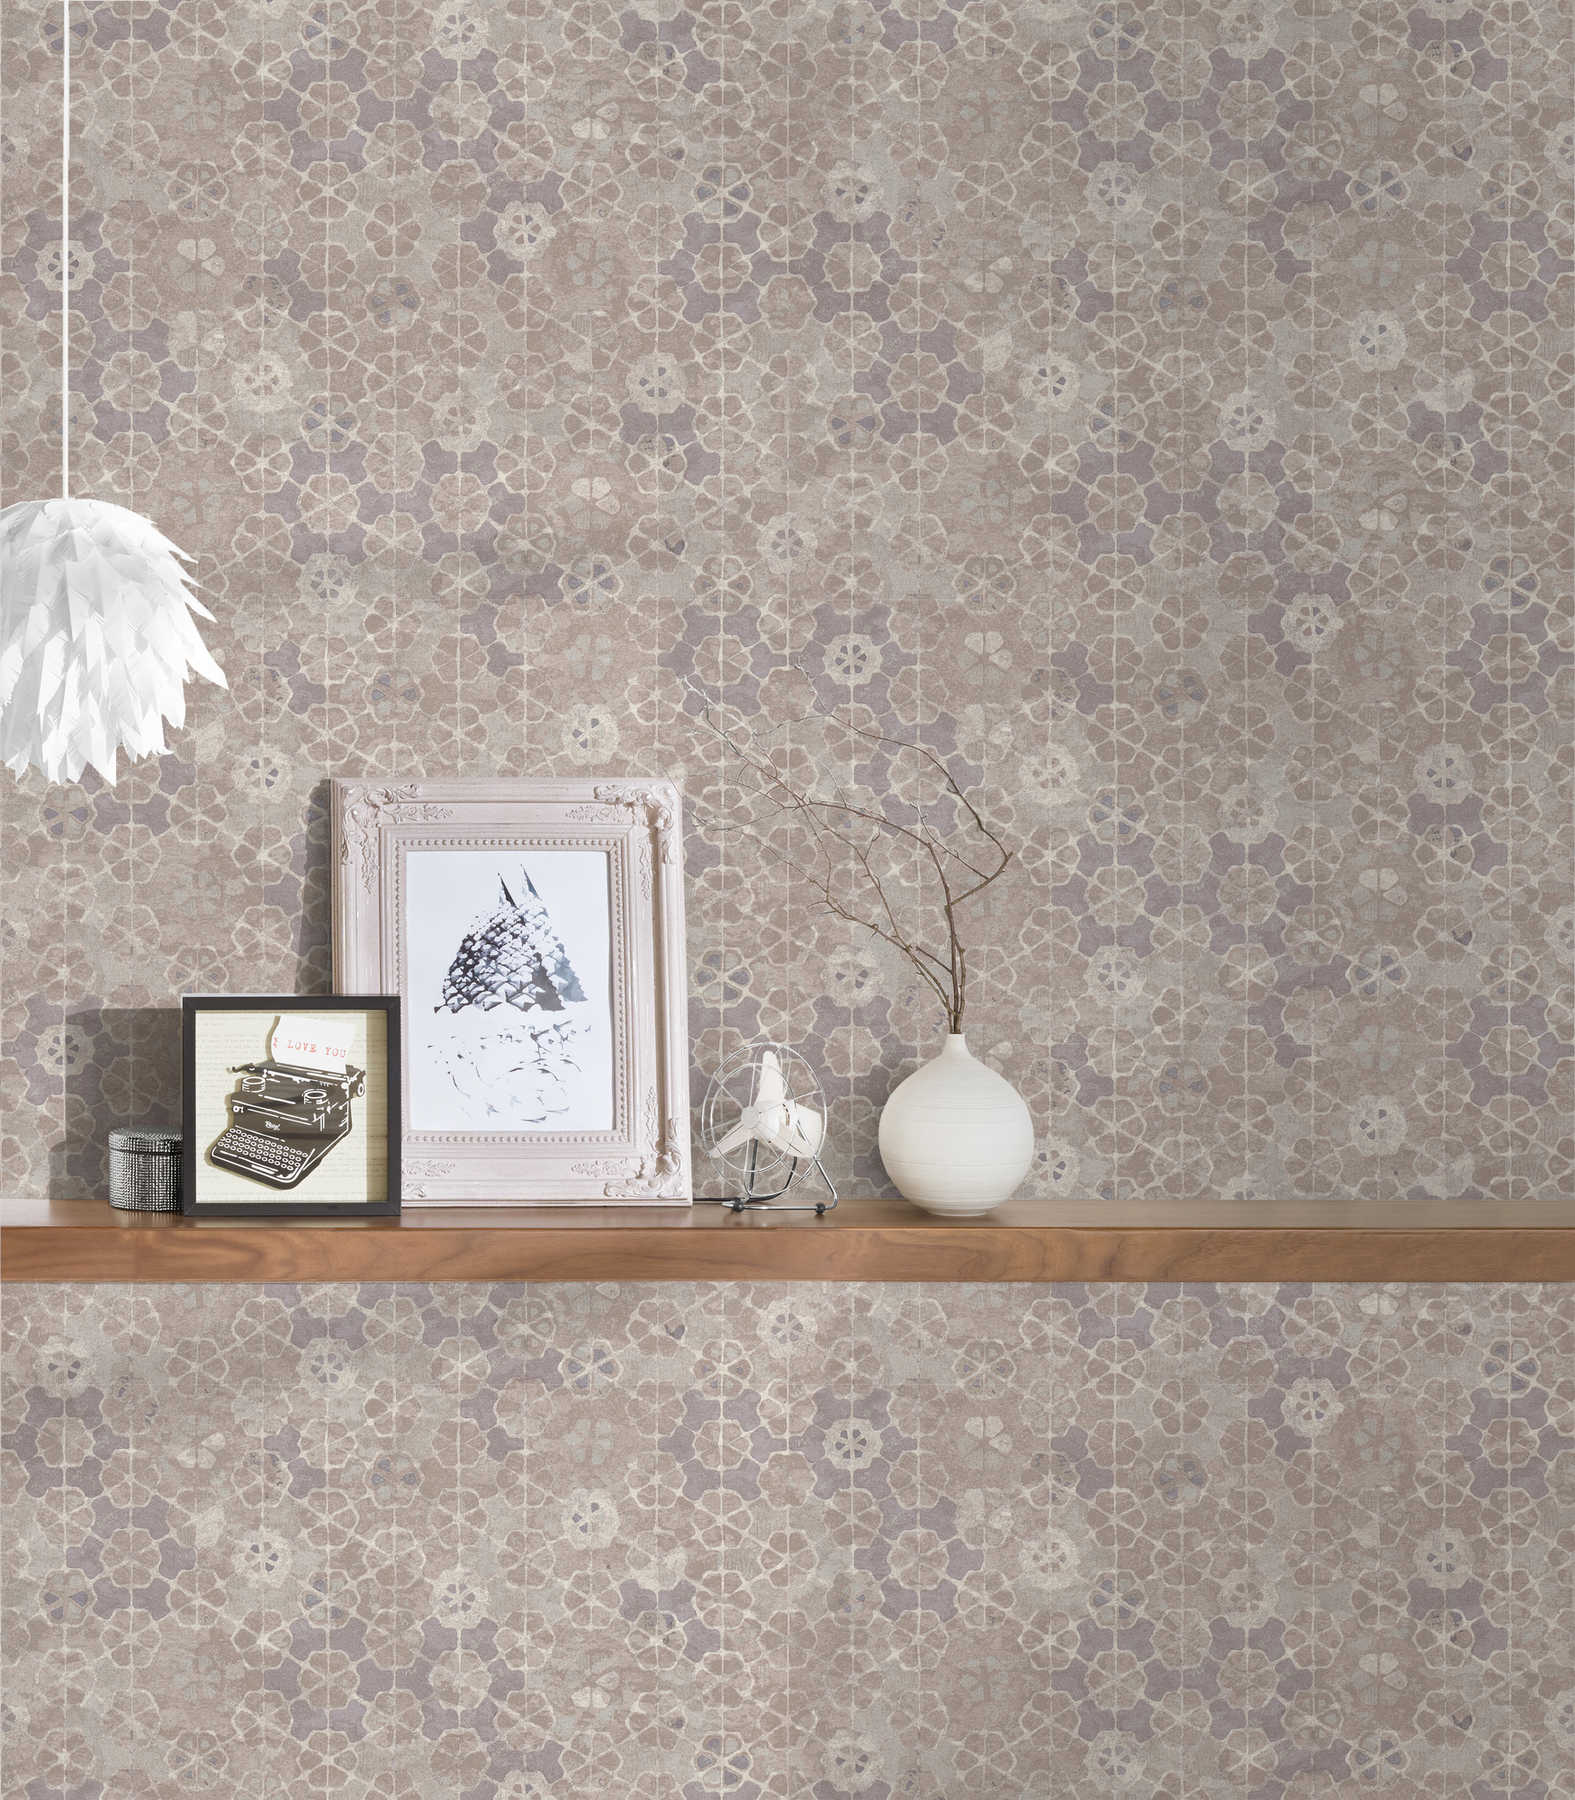             Non-woven wallpaper tile look with silver shimmer - grey, white
        